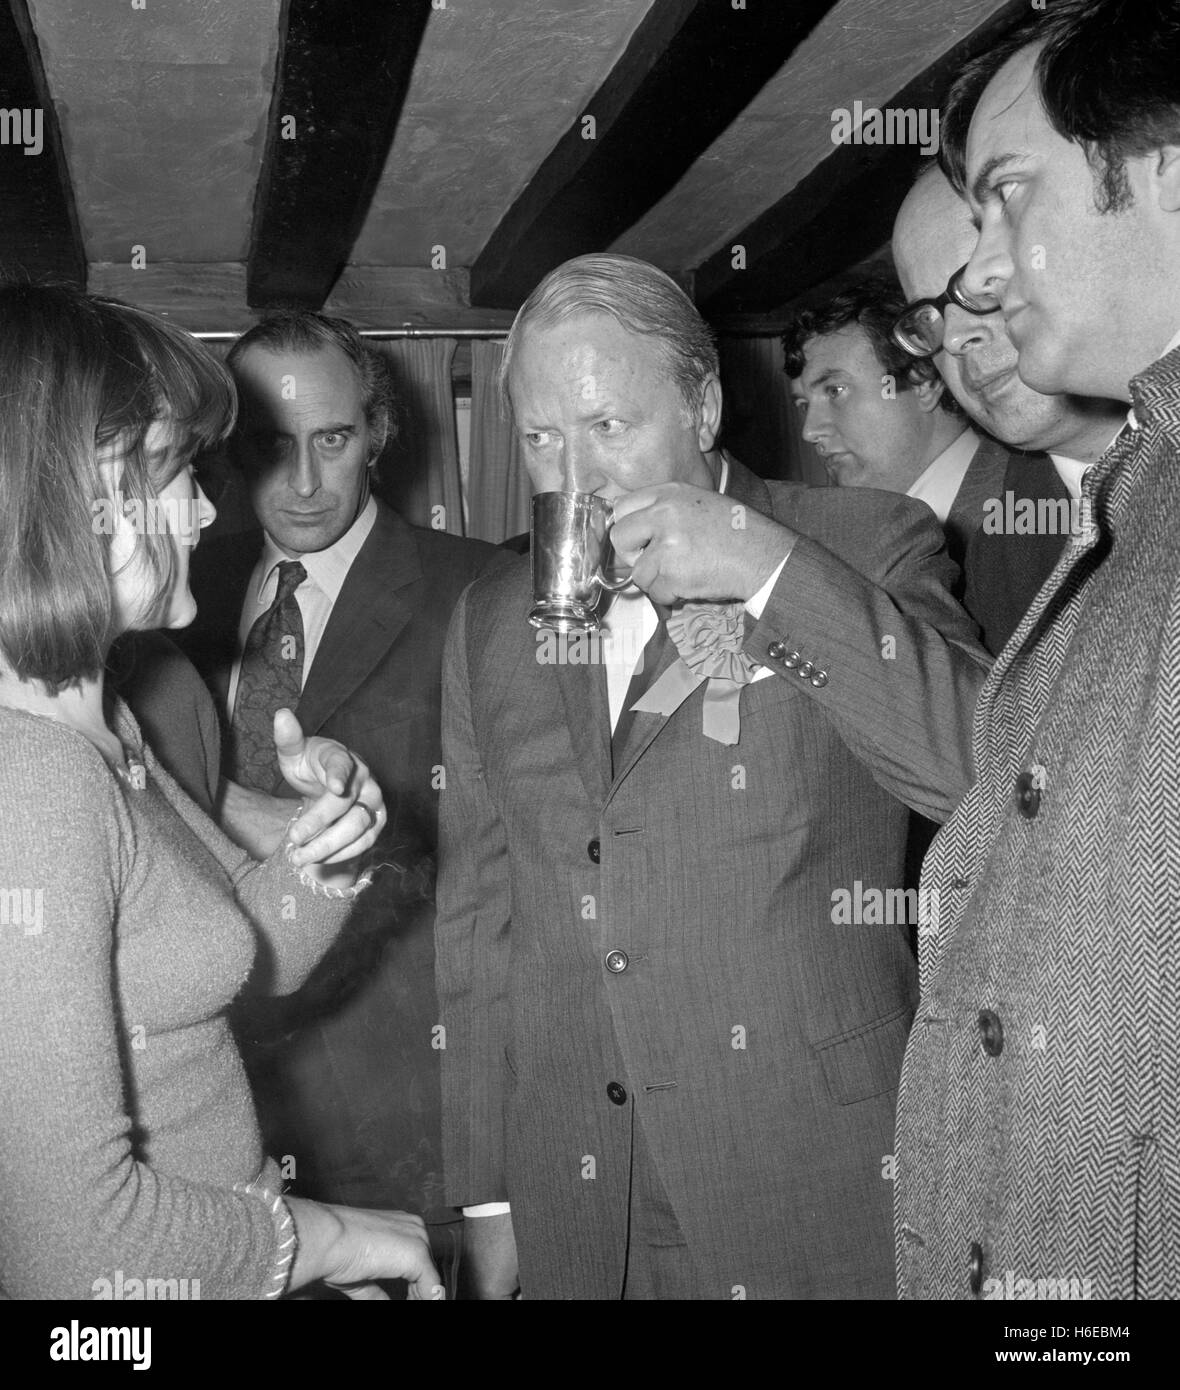 Prime Minister Edward Heath talks to Susan Bannon at the King's Head public house in Bexley. Earlier Mr Heath had attended his Adoption meeting at Chislehurst and Sidcup Boys Grammar School in Hurst Road, Sidcup.PA_AF_165380-21 Stock Photo